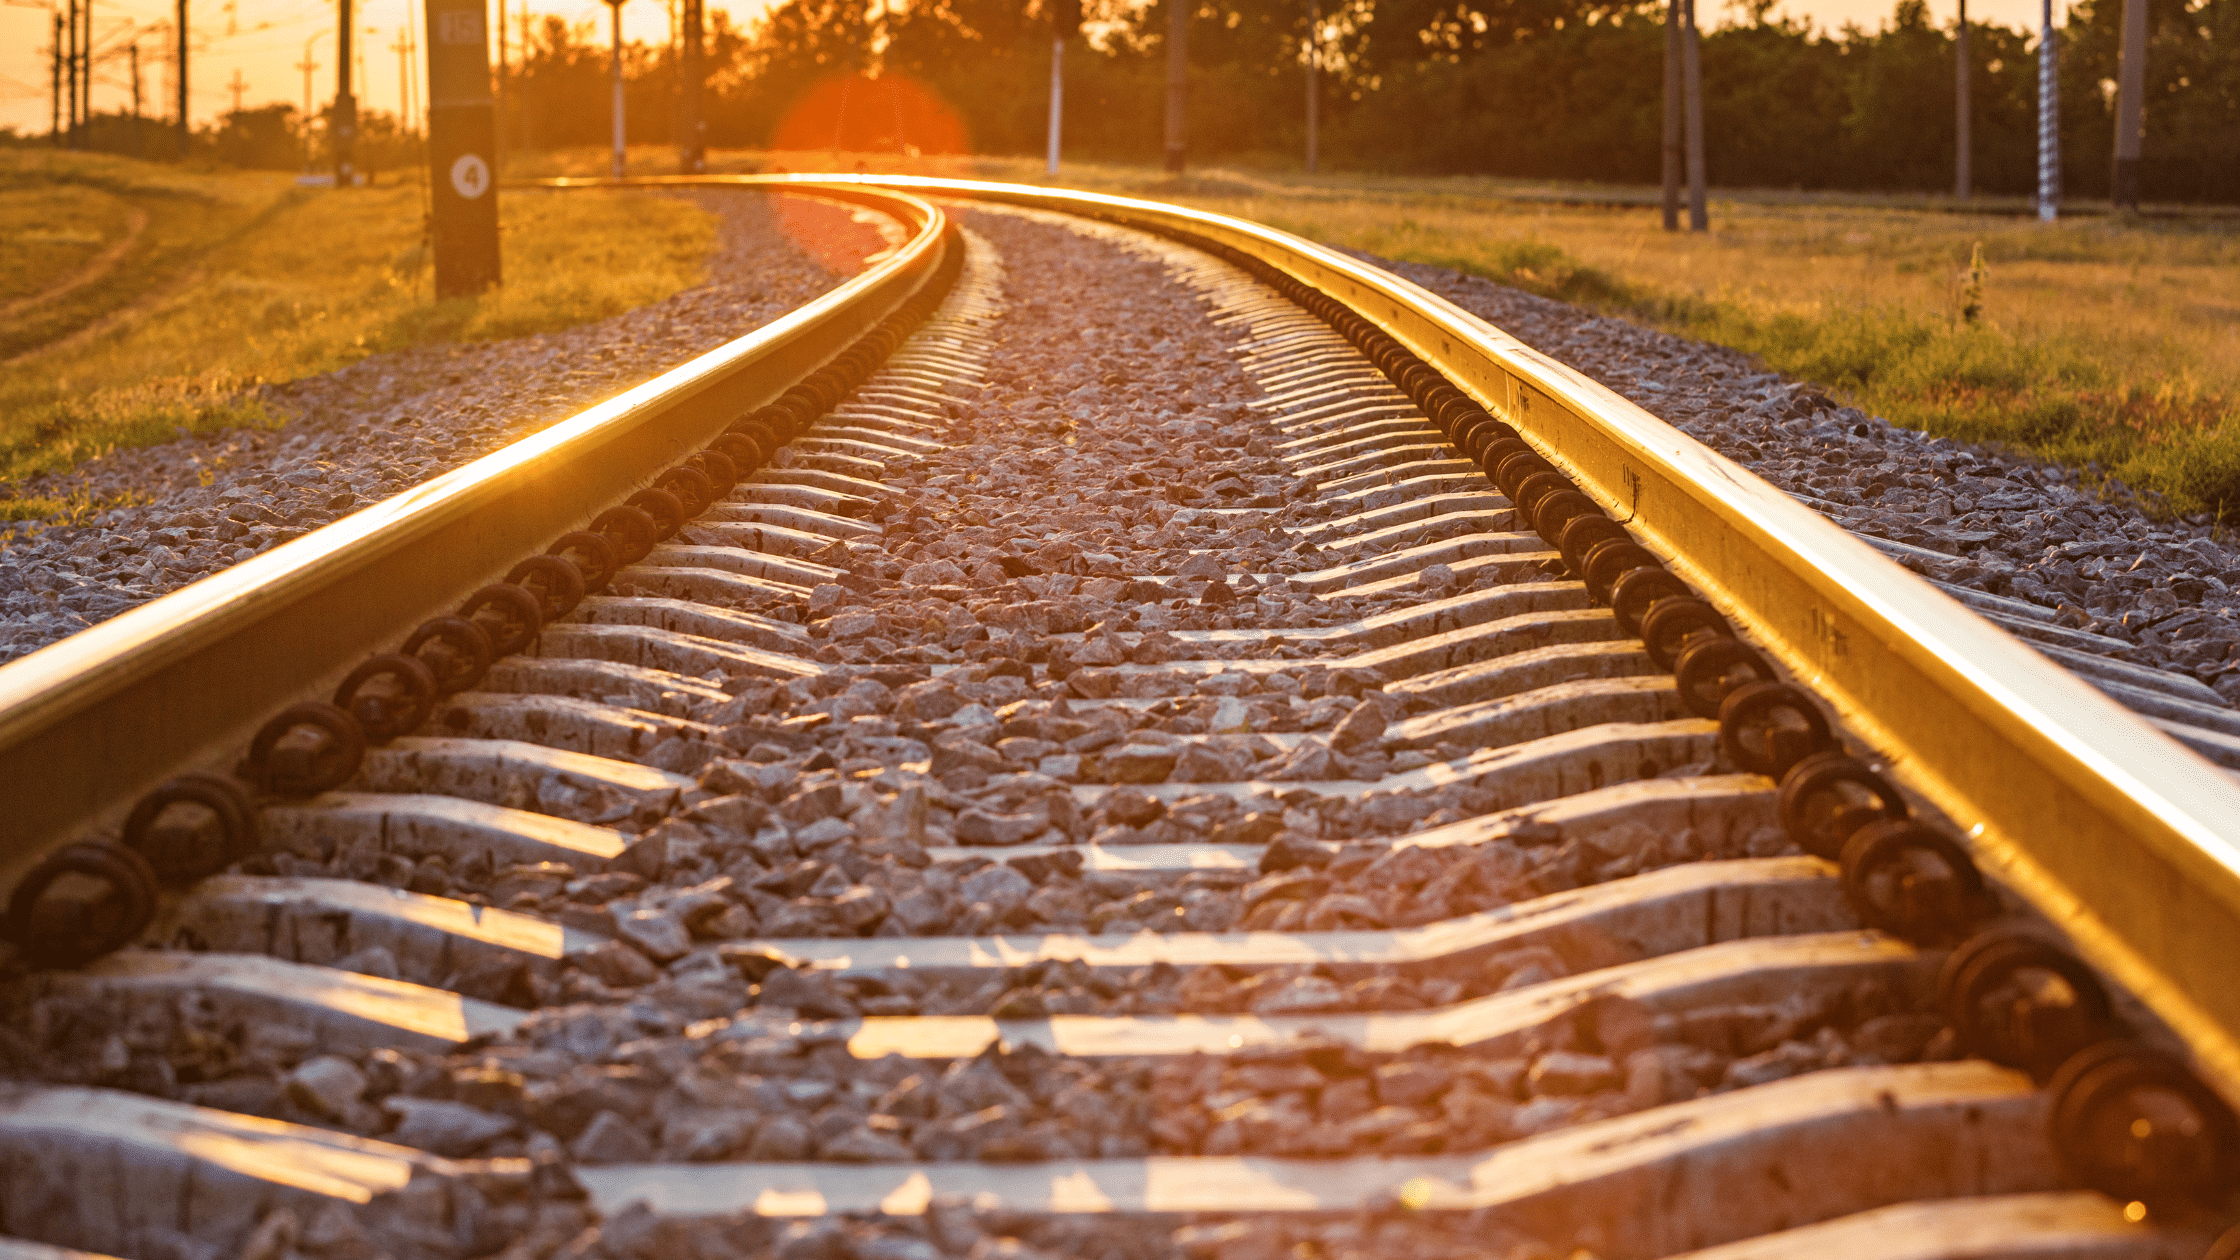 Staying on Track with Your Retirement Investments